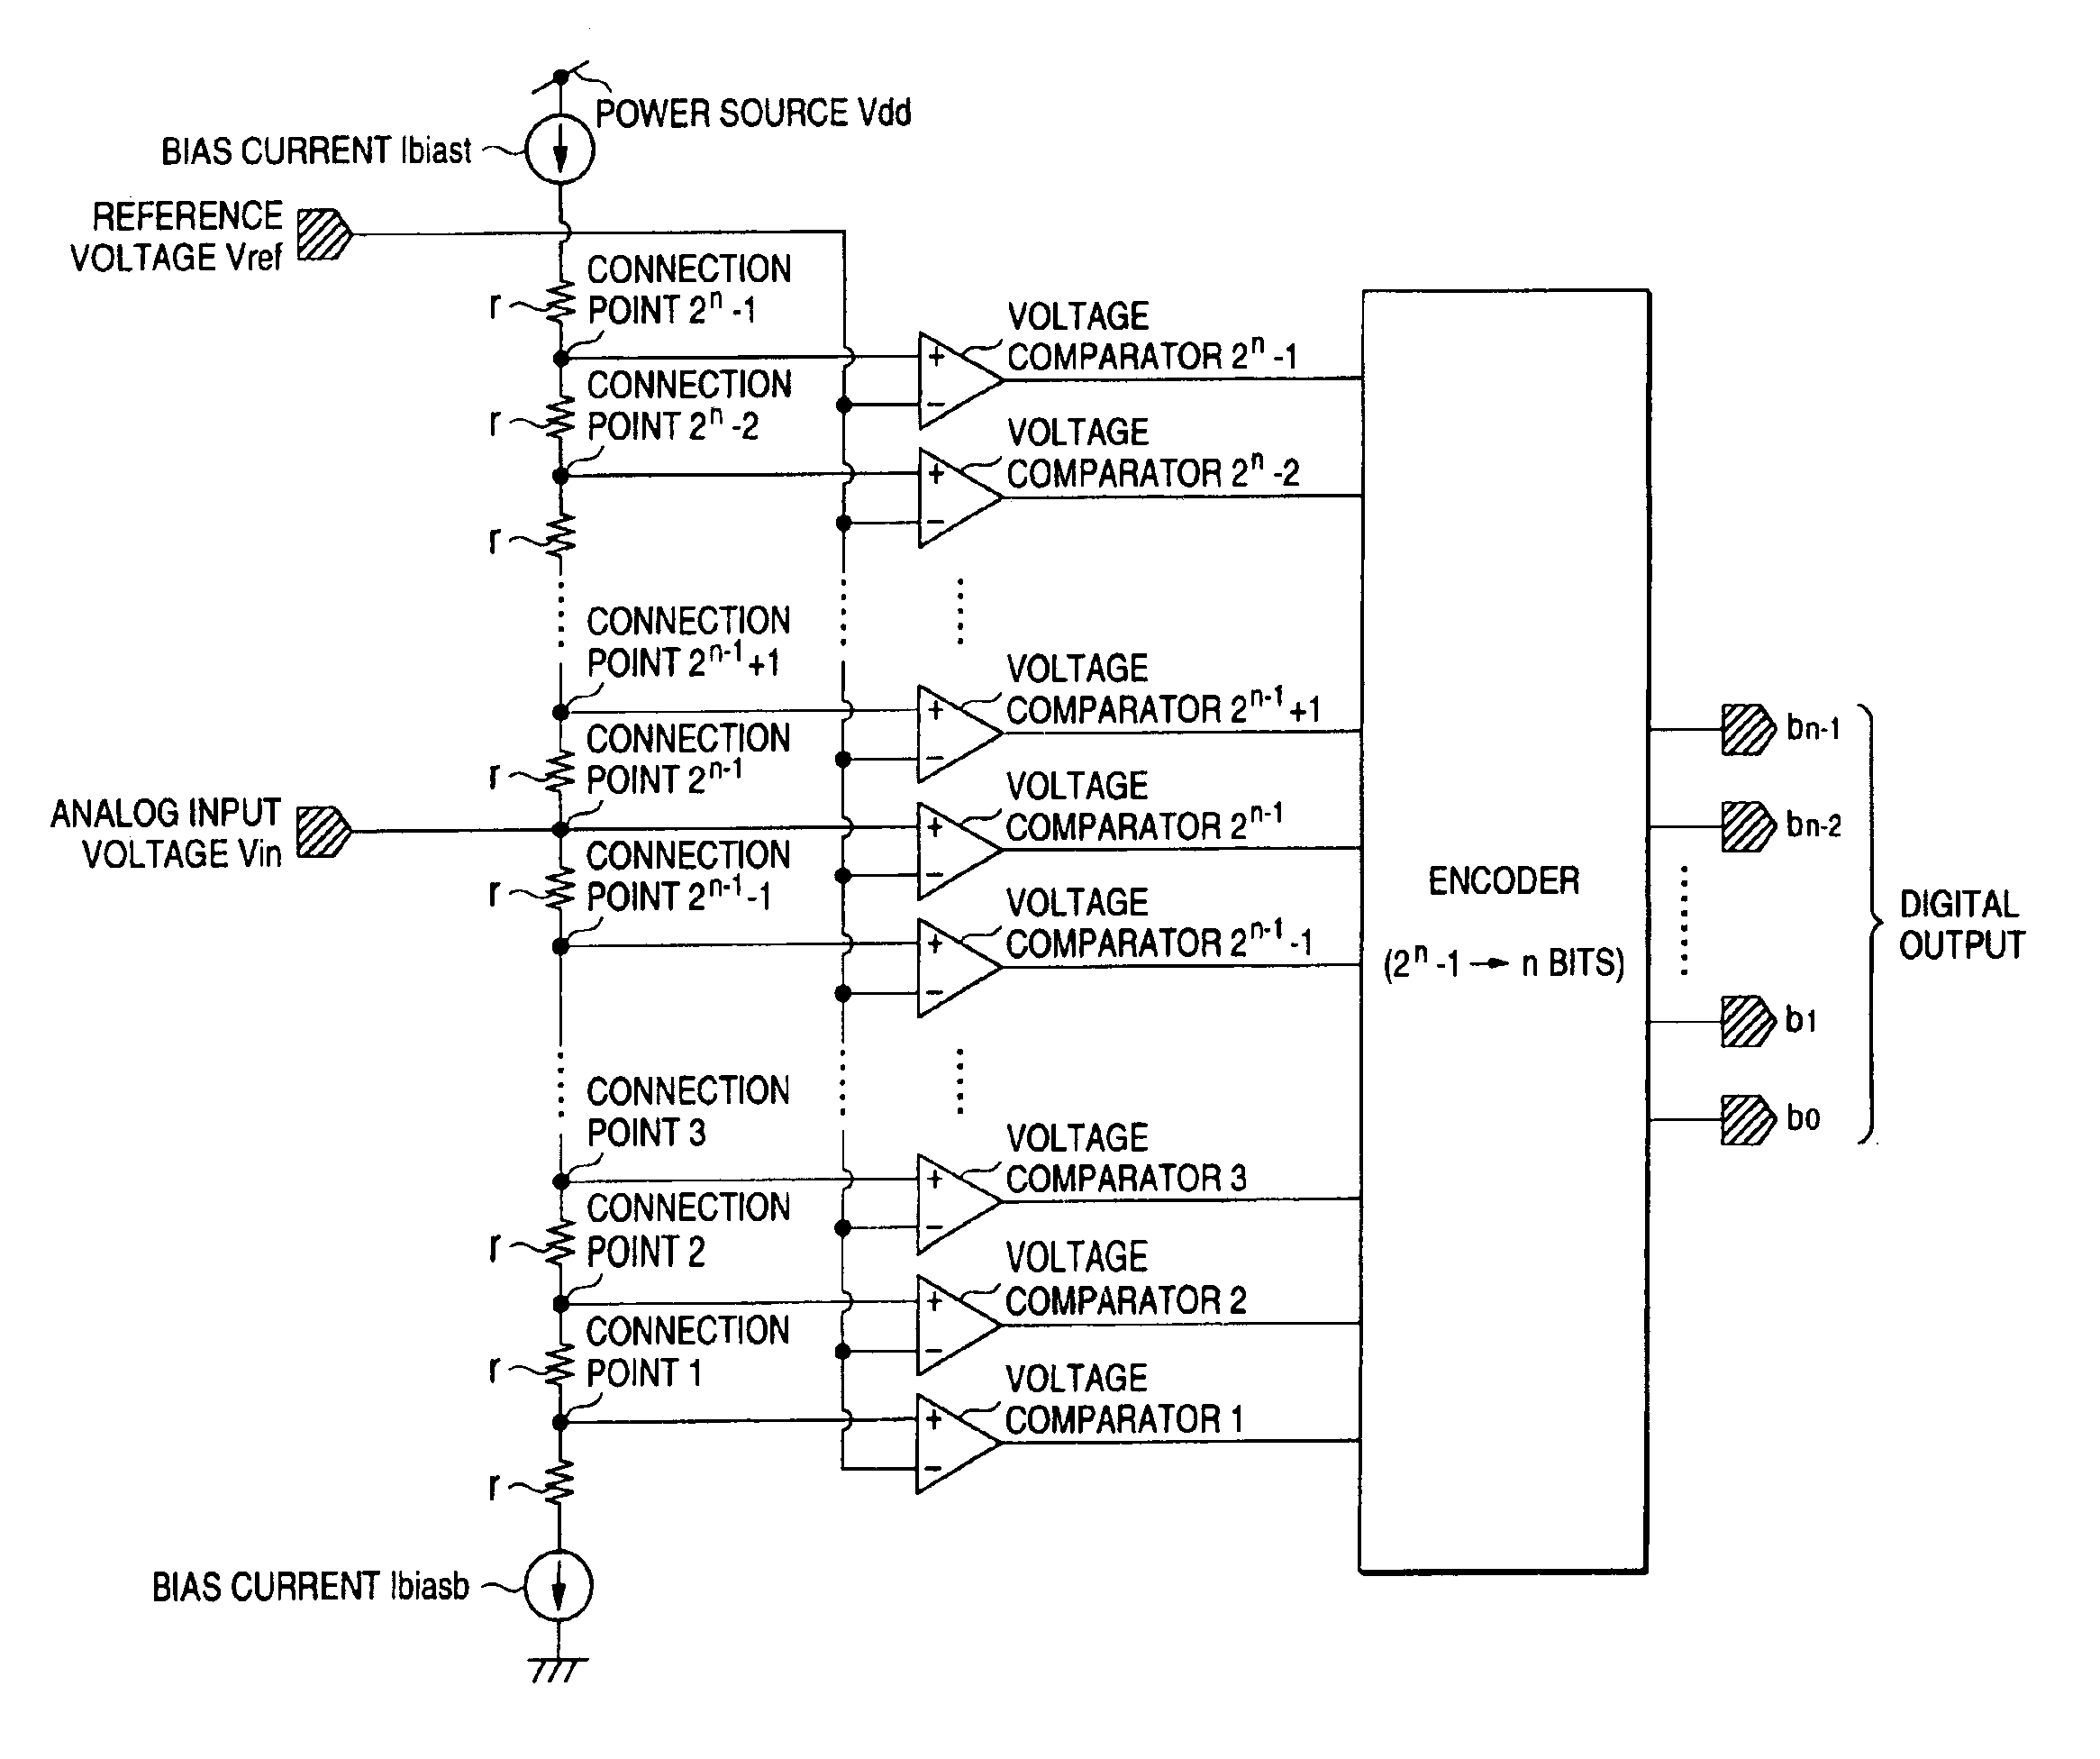 Analog to digital converter with voltage comparators that compare a reference voltage with voltages at connection points on a resistor ladder